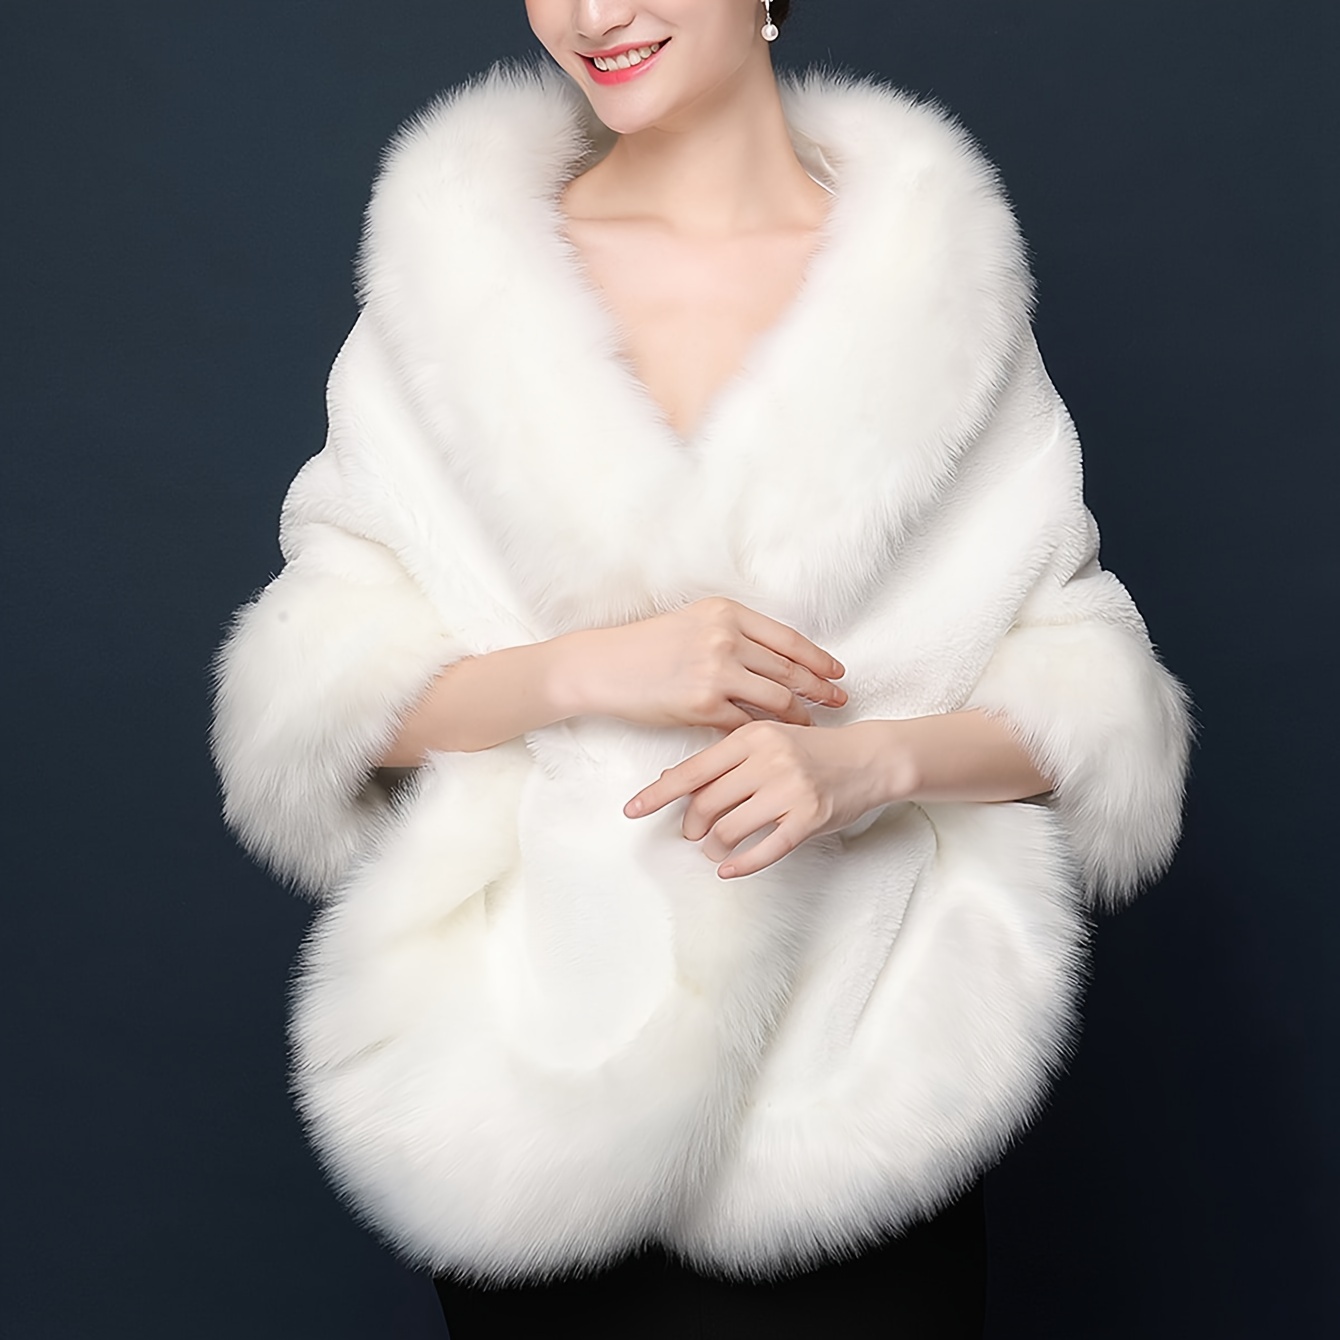 

Elegant Baroque-inspired White Faux Fur Shawl - Warm, Windproof Cape For Bridal & Party Gatherings, Perfect For Weddings And Winter Events